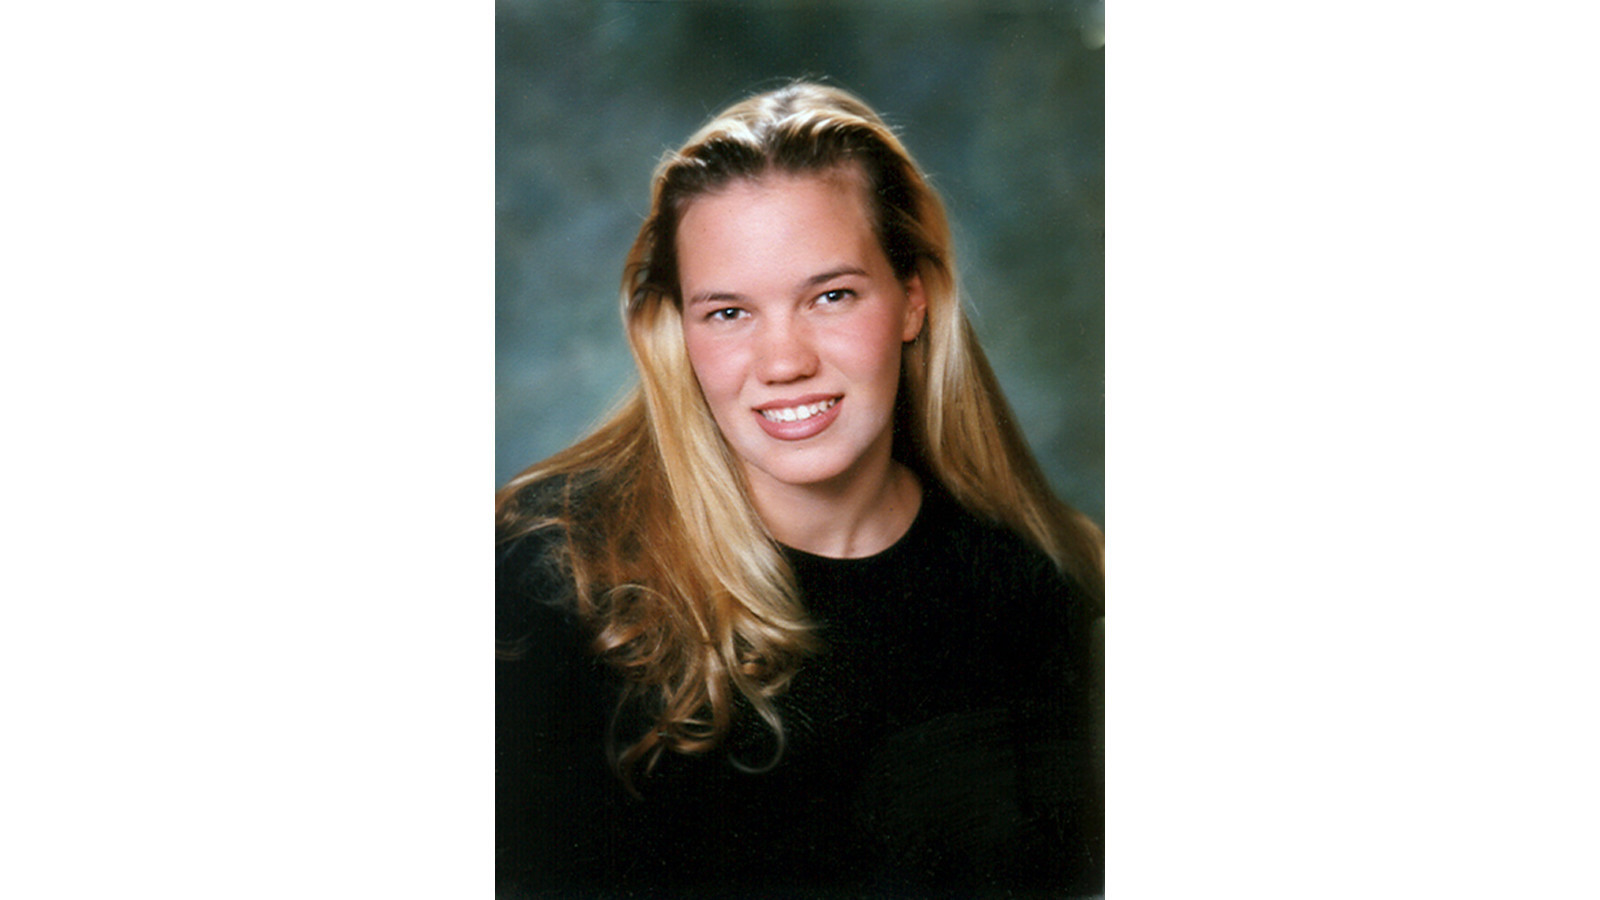 Cal Poly student Kristin Smart vanished 20 years ago. Now, authorities are digging the ...